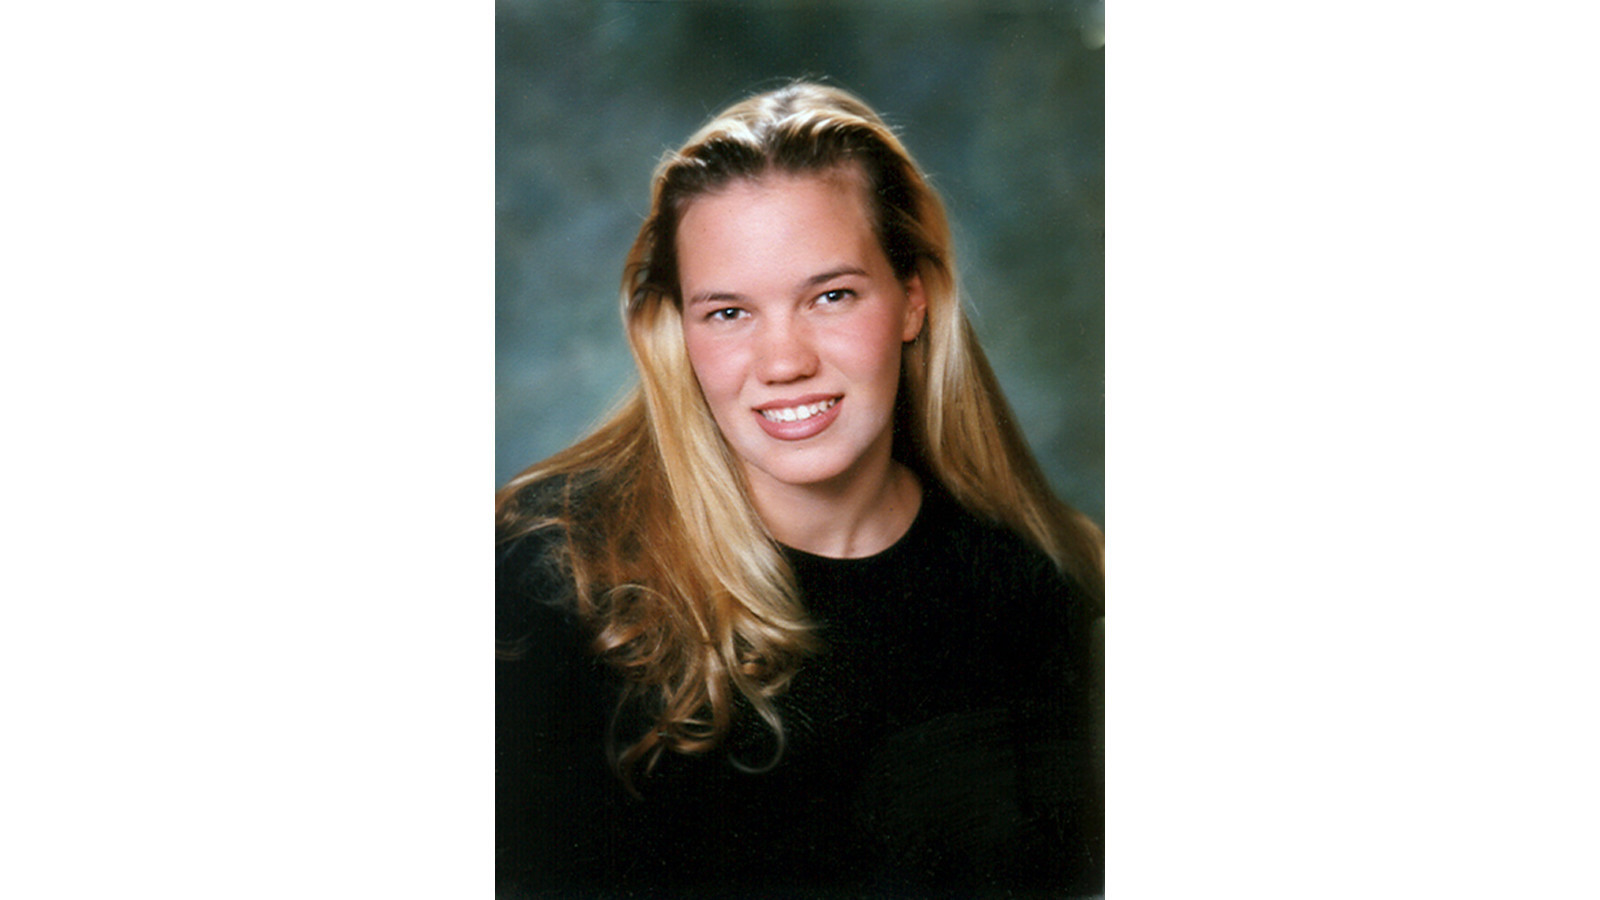 Cal Poly student Kristin Smart vanished 20 years ago. Now, authorities are digging the ...